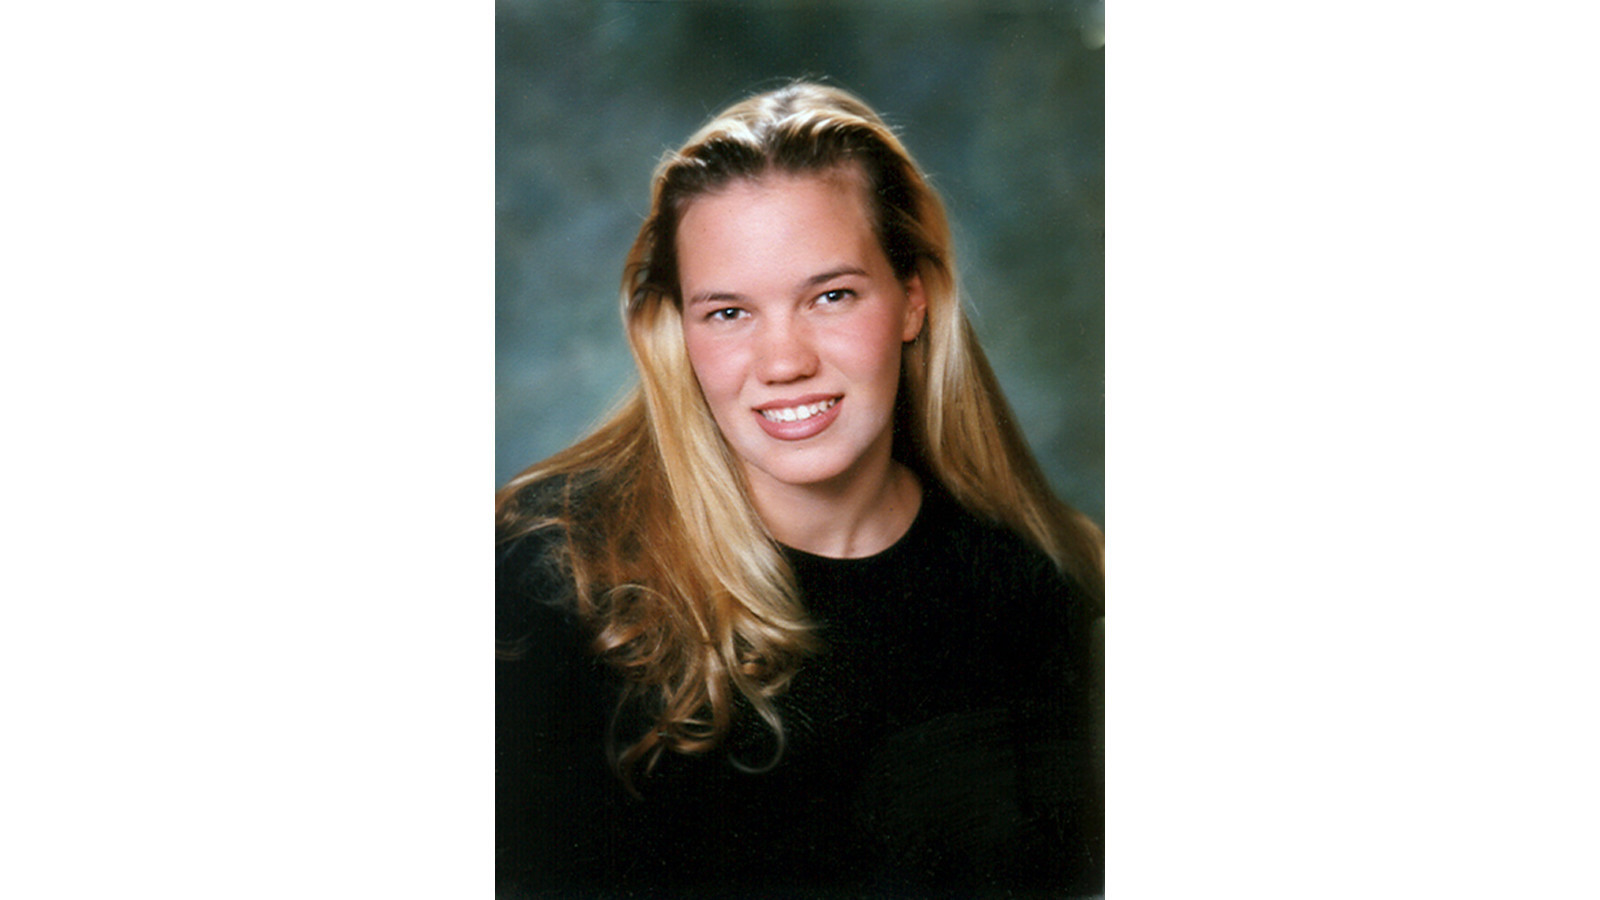 Cal Poly student Kristin Smart vanished 20 years ago. Now, authorities are digging the ...